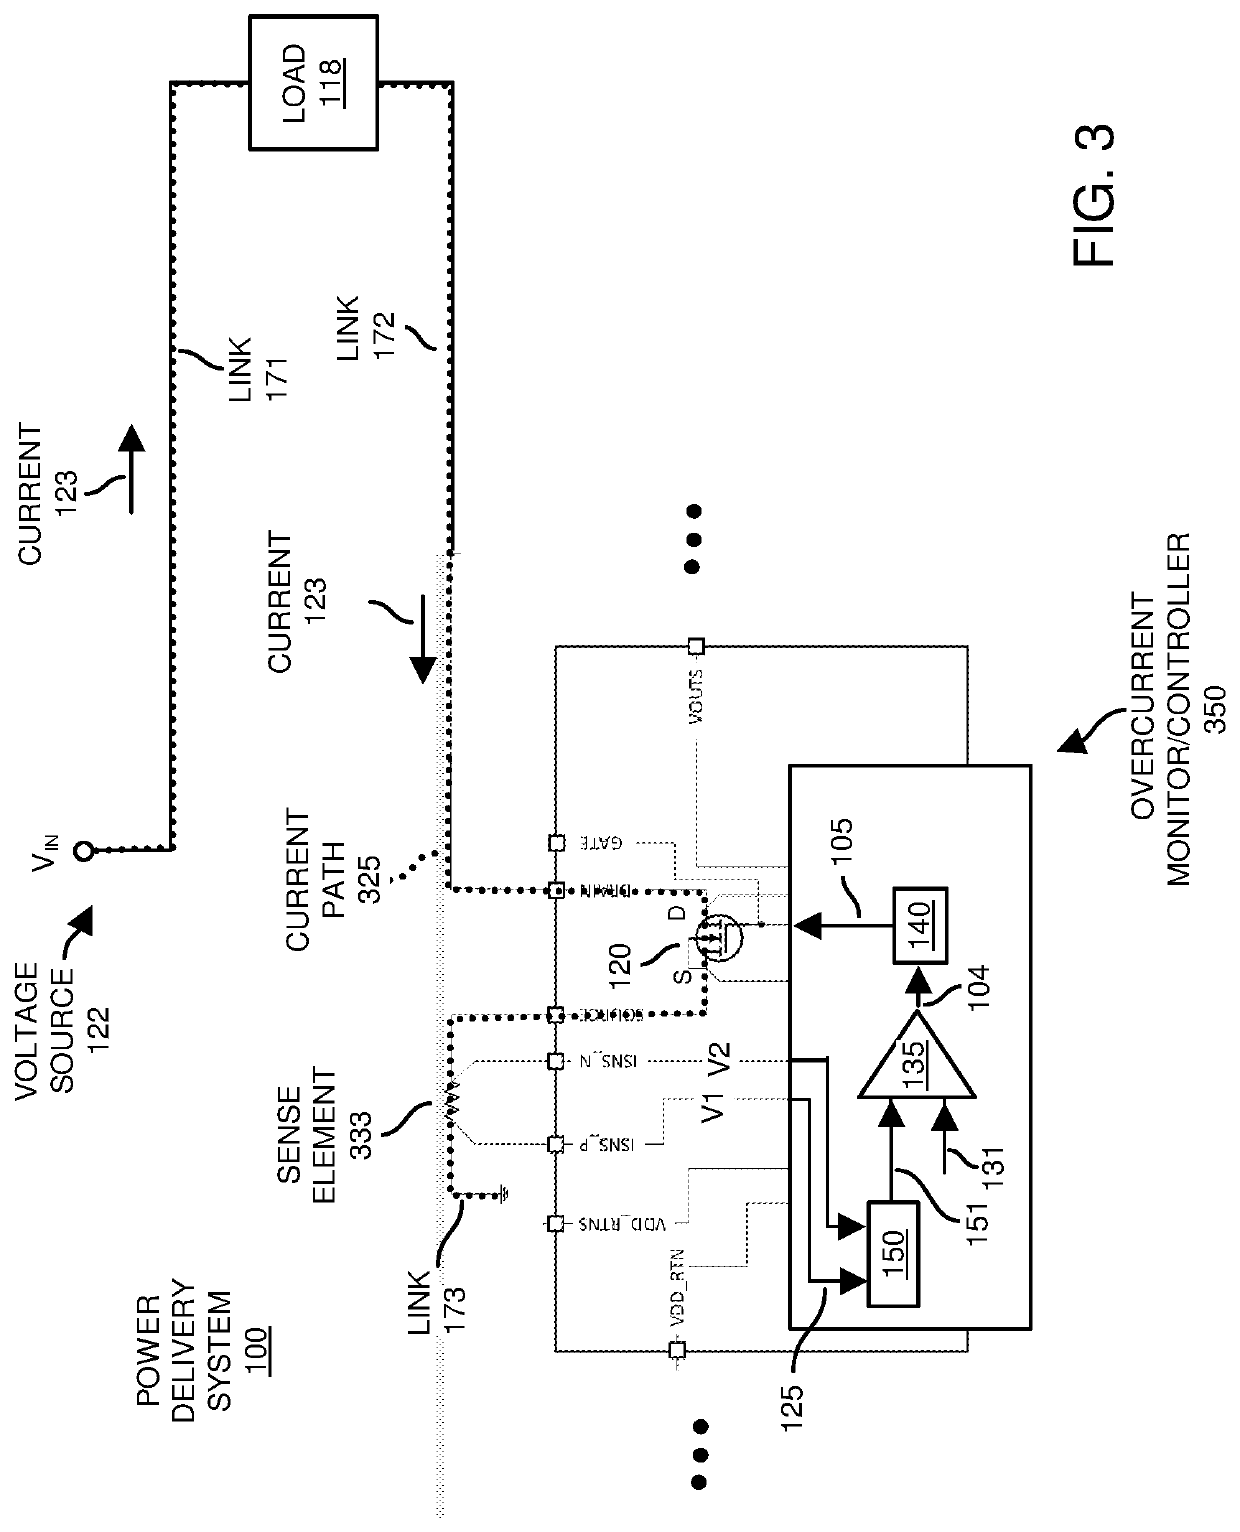 Power delivery control and over current protection